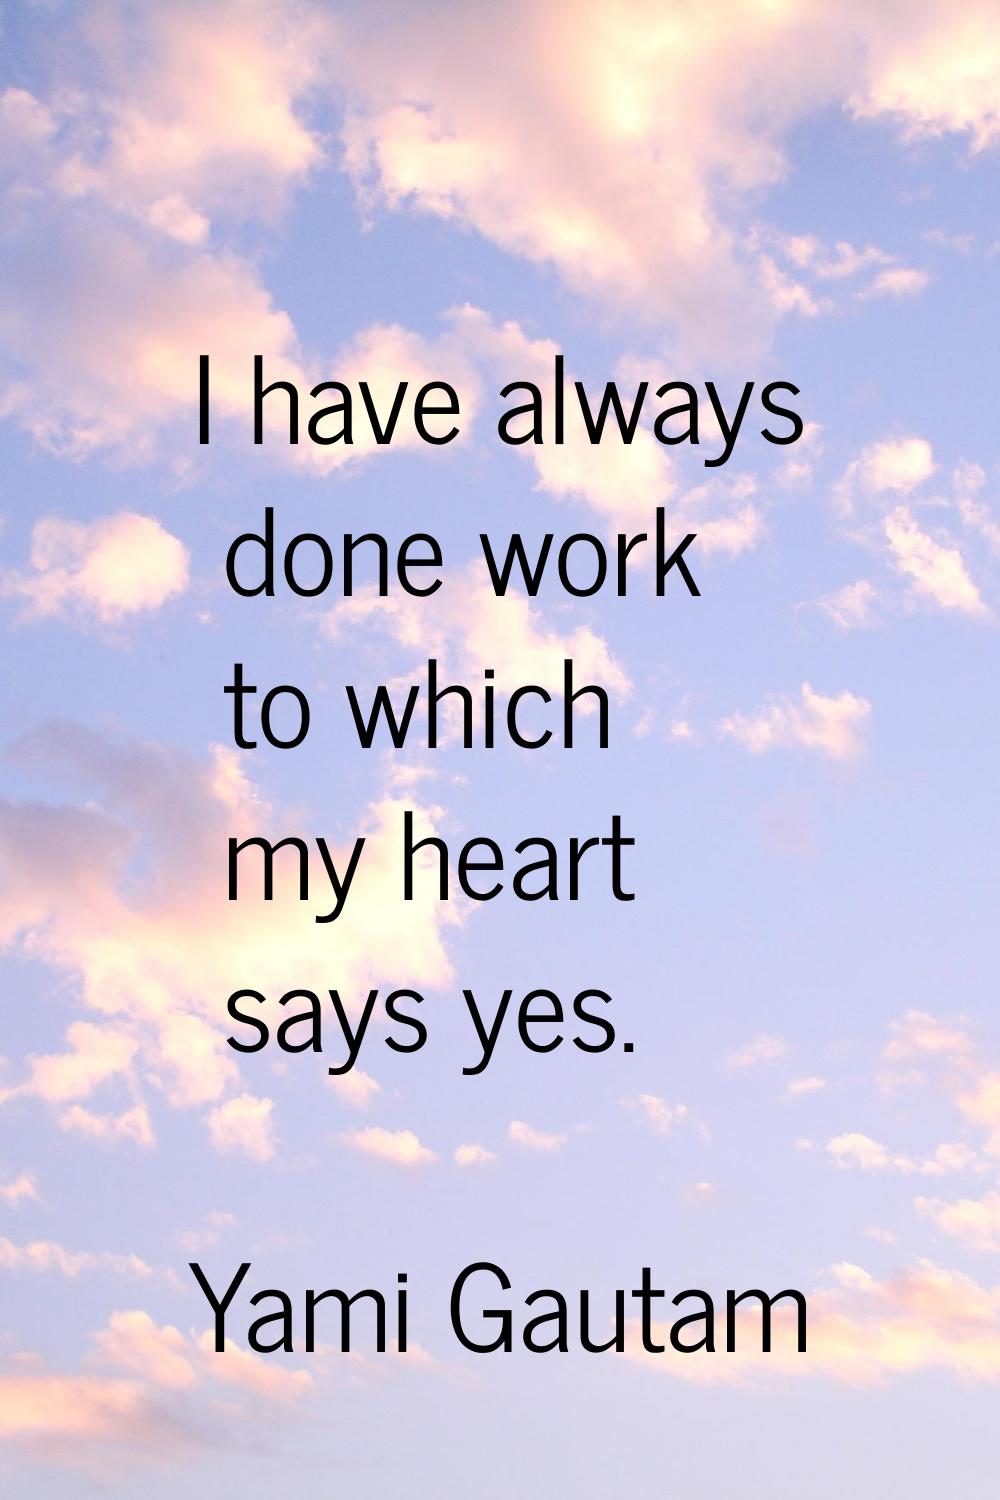 I have always done work to which my heart says yes.